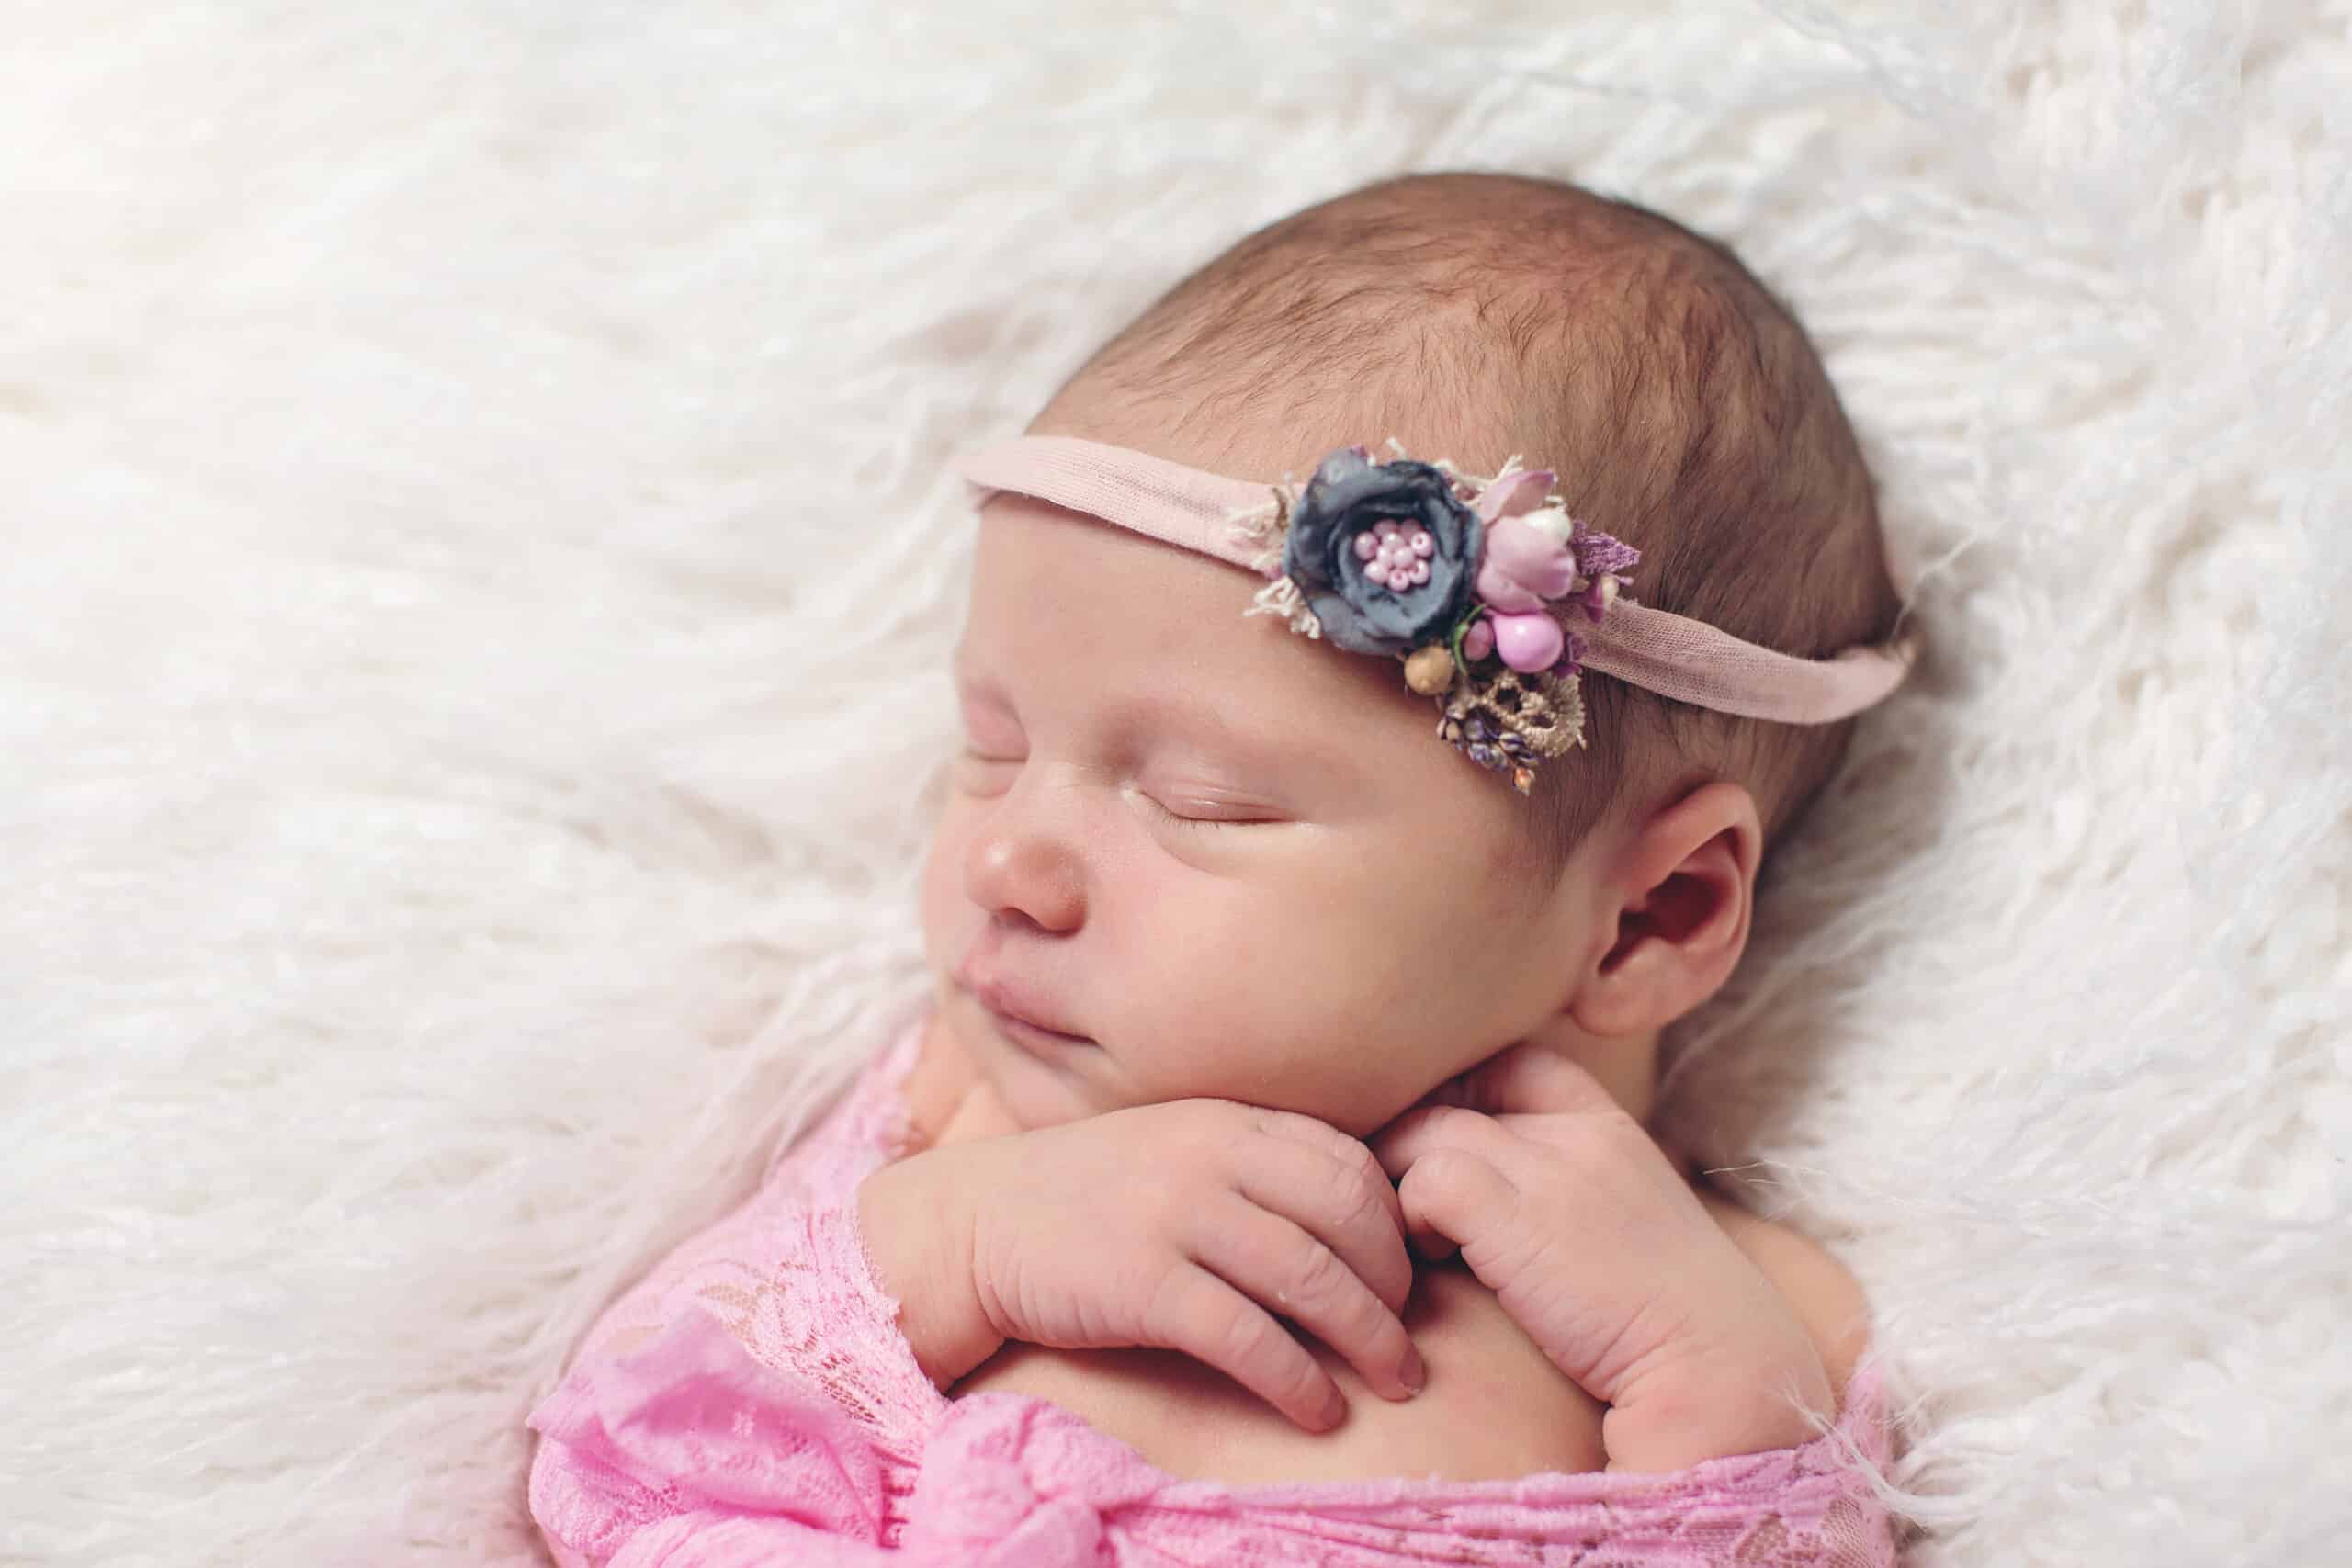 small newborn cute baby, infant girl sleeping in a basket in a flowered dressing on a rug in a hat with a toy, tenderness love care, angel smile, pink-blue color in a flower dressing bunny